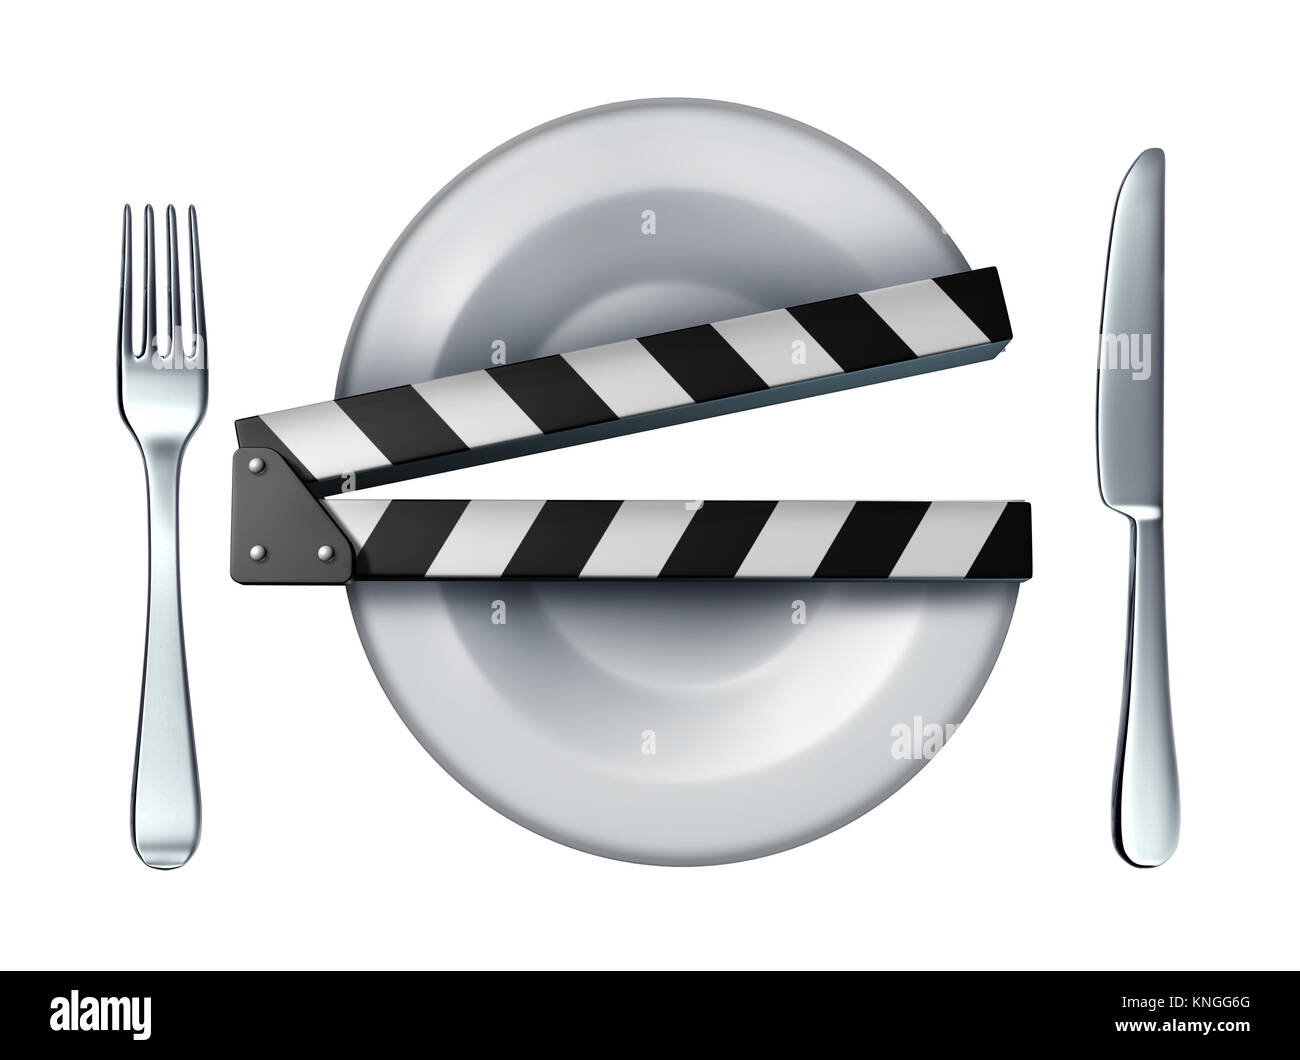 Food video and cooking movie clapper concept or streaming culinary course concept as a dinner plate shaped as a clapboard as a 3D illustration. Stock Photo